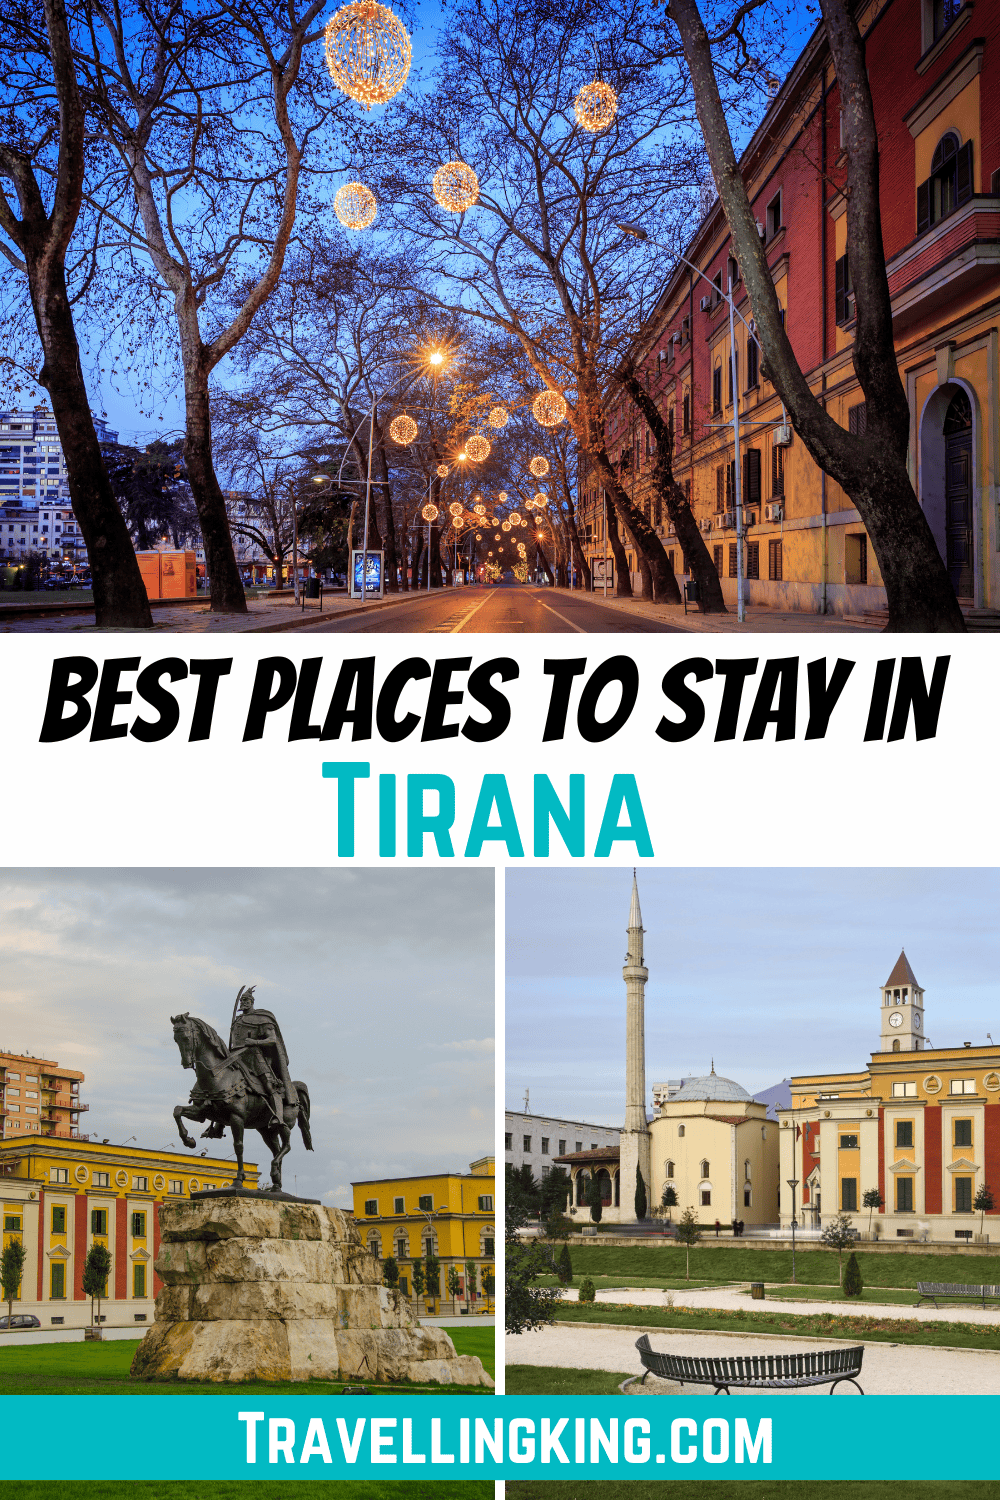 Where to stay in Tirana - Best Places to stay in Tirana